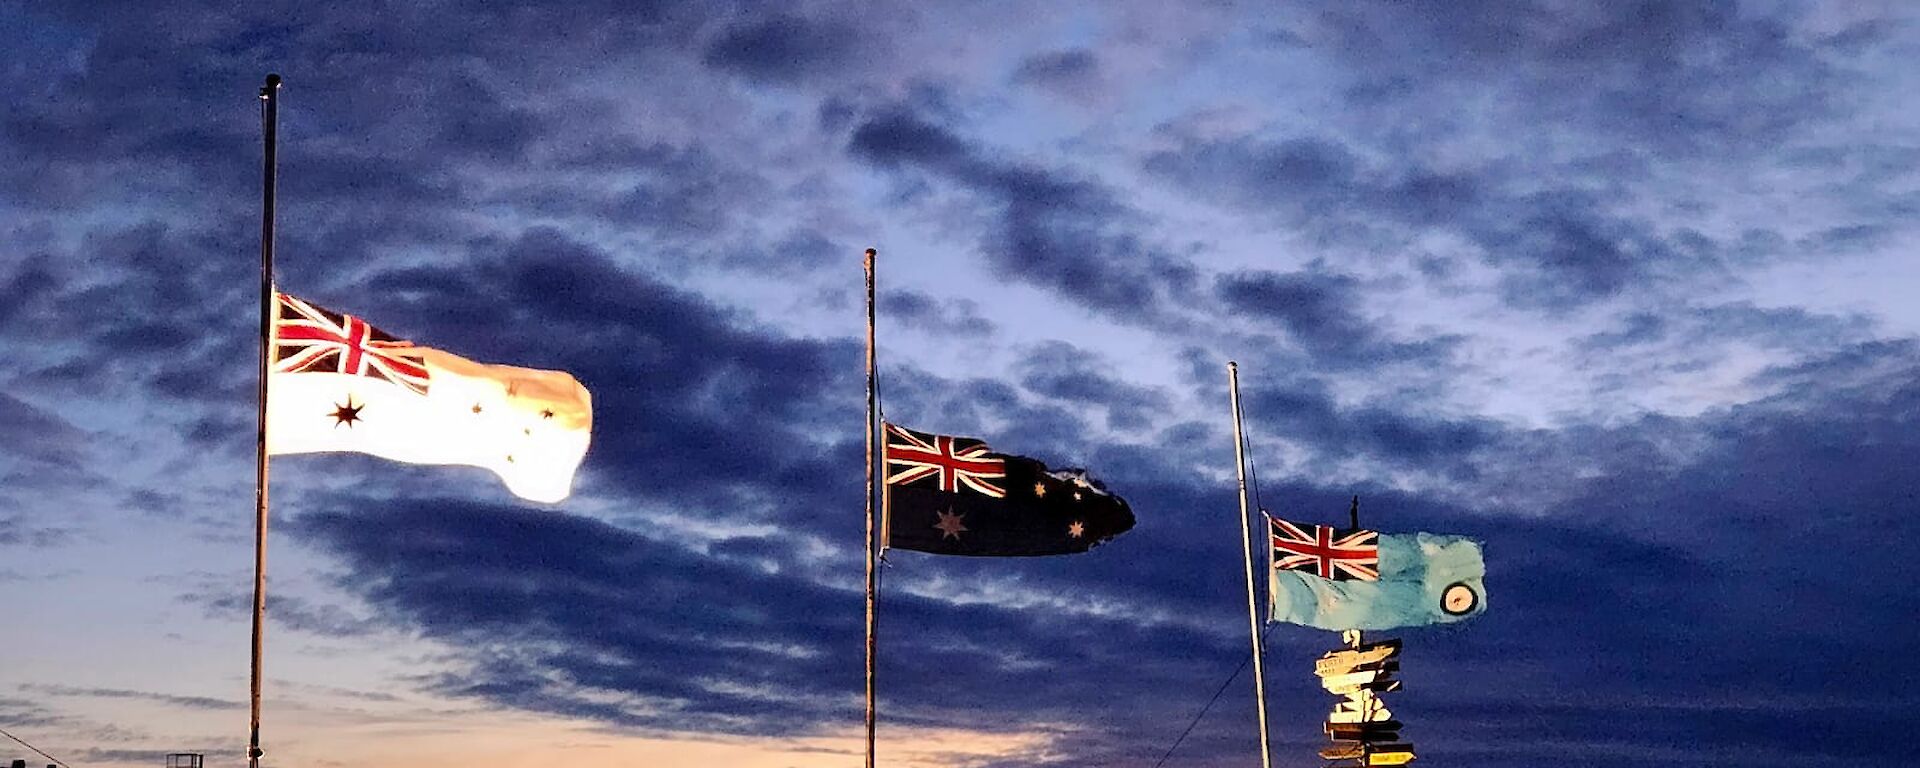 Three flag poles occupy the main part of the photo, with flags at half mast, and a light orange sunset in the background. The flags are all Australian, with the left one being white for the Navy, the centre one is the dark blue Australian Flag, and the right hand flag is light blue for the Airforce. The flag poles are mounted on a snow covered rocky hill and the sky is partly cloudy.